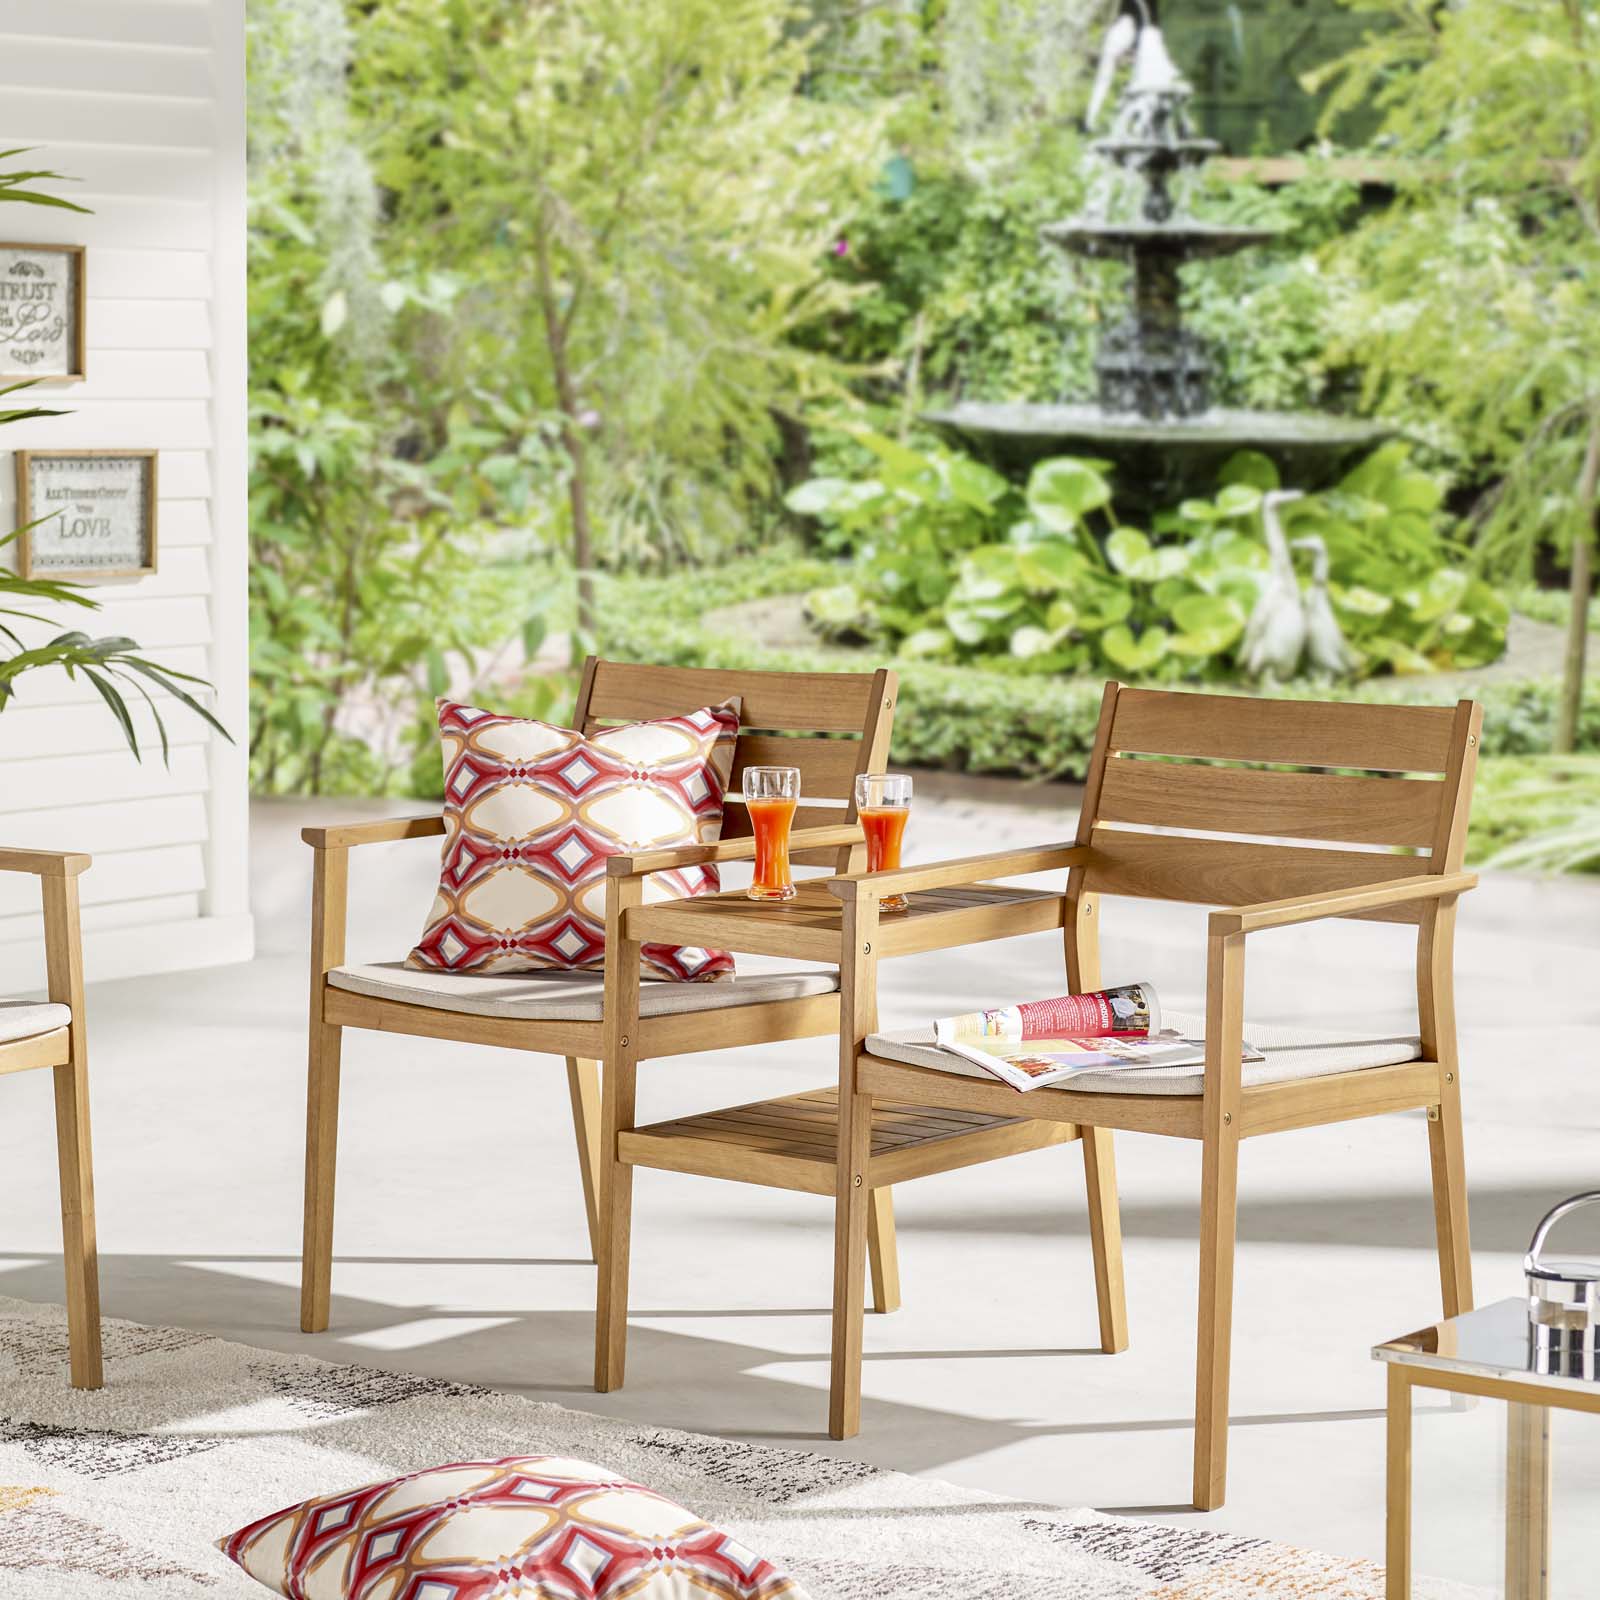 Viewscape Outdoor Patio Ash Wood Jack and Jill Chair Set